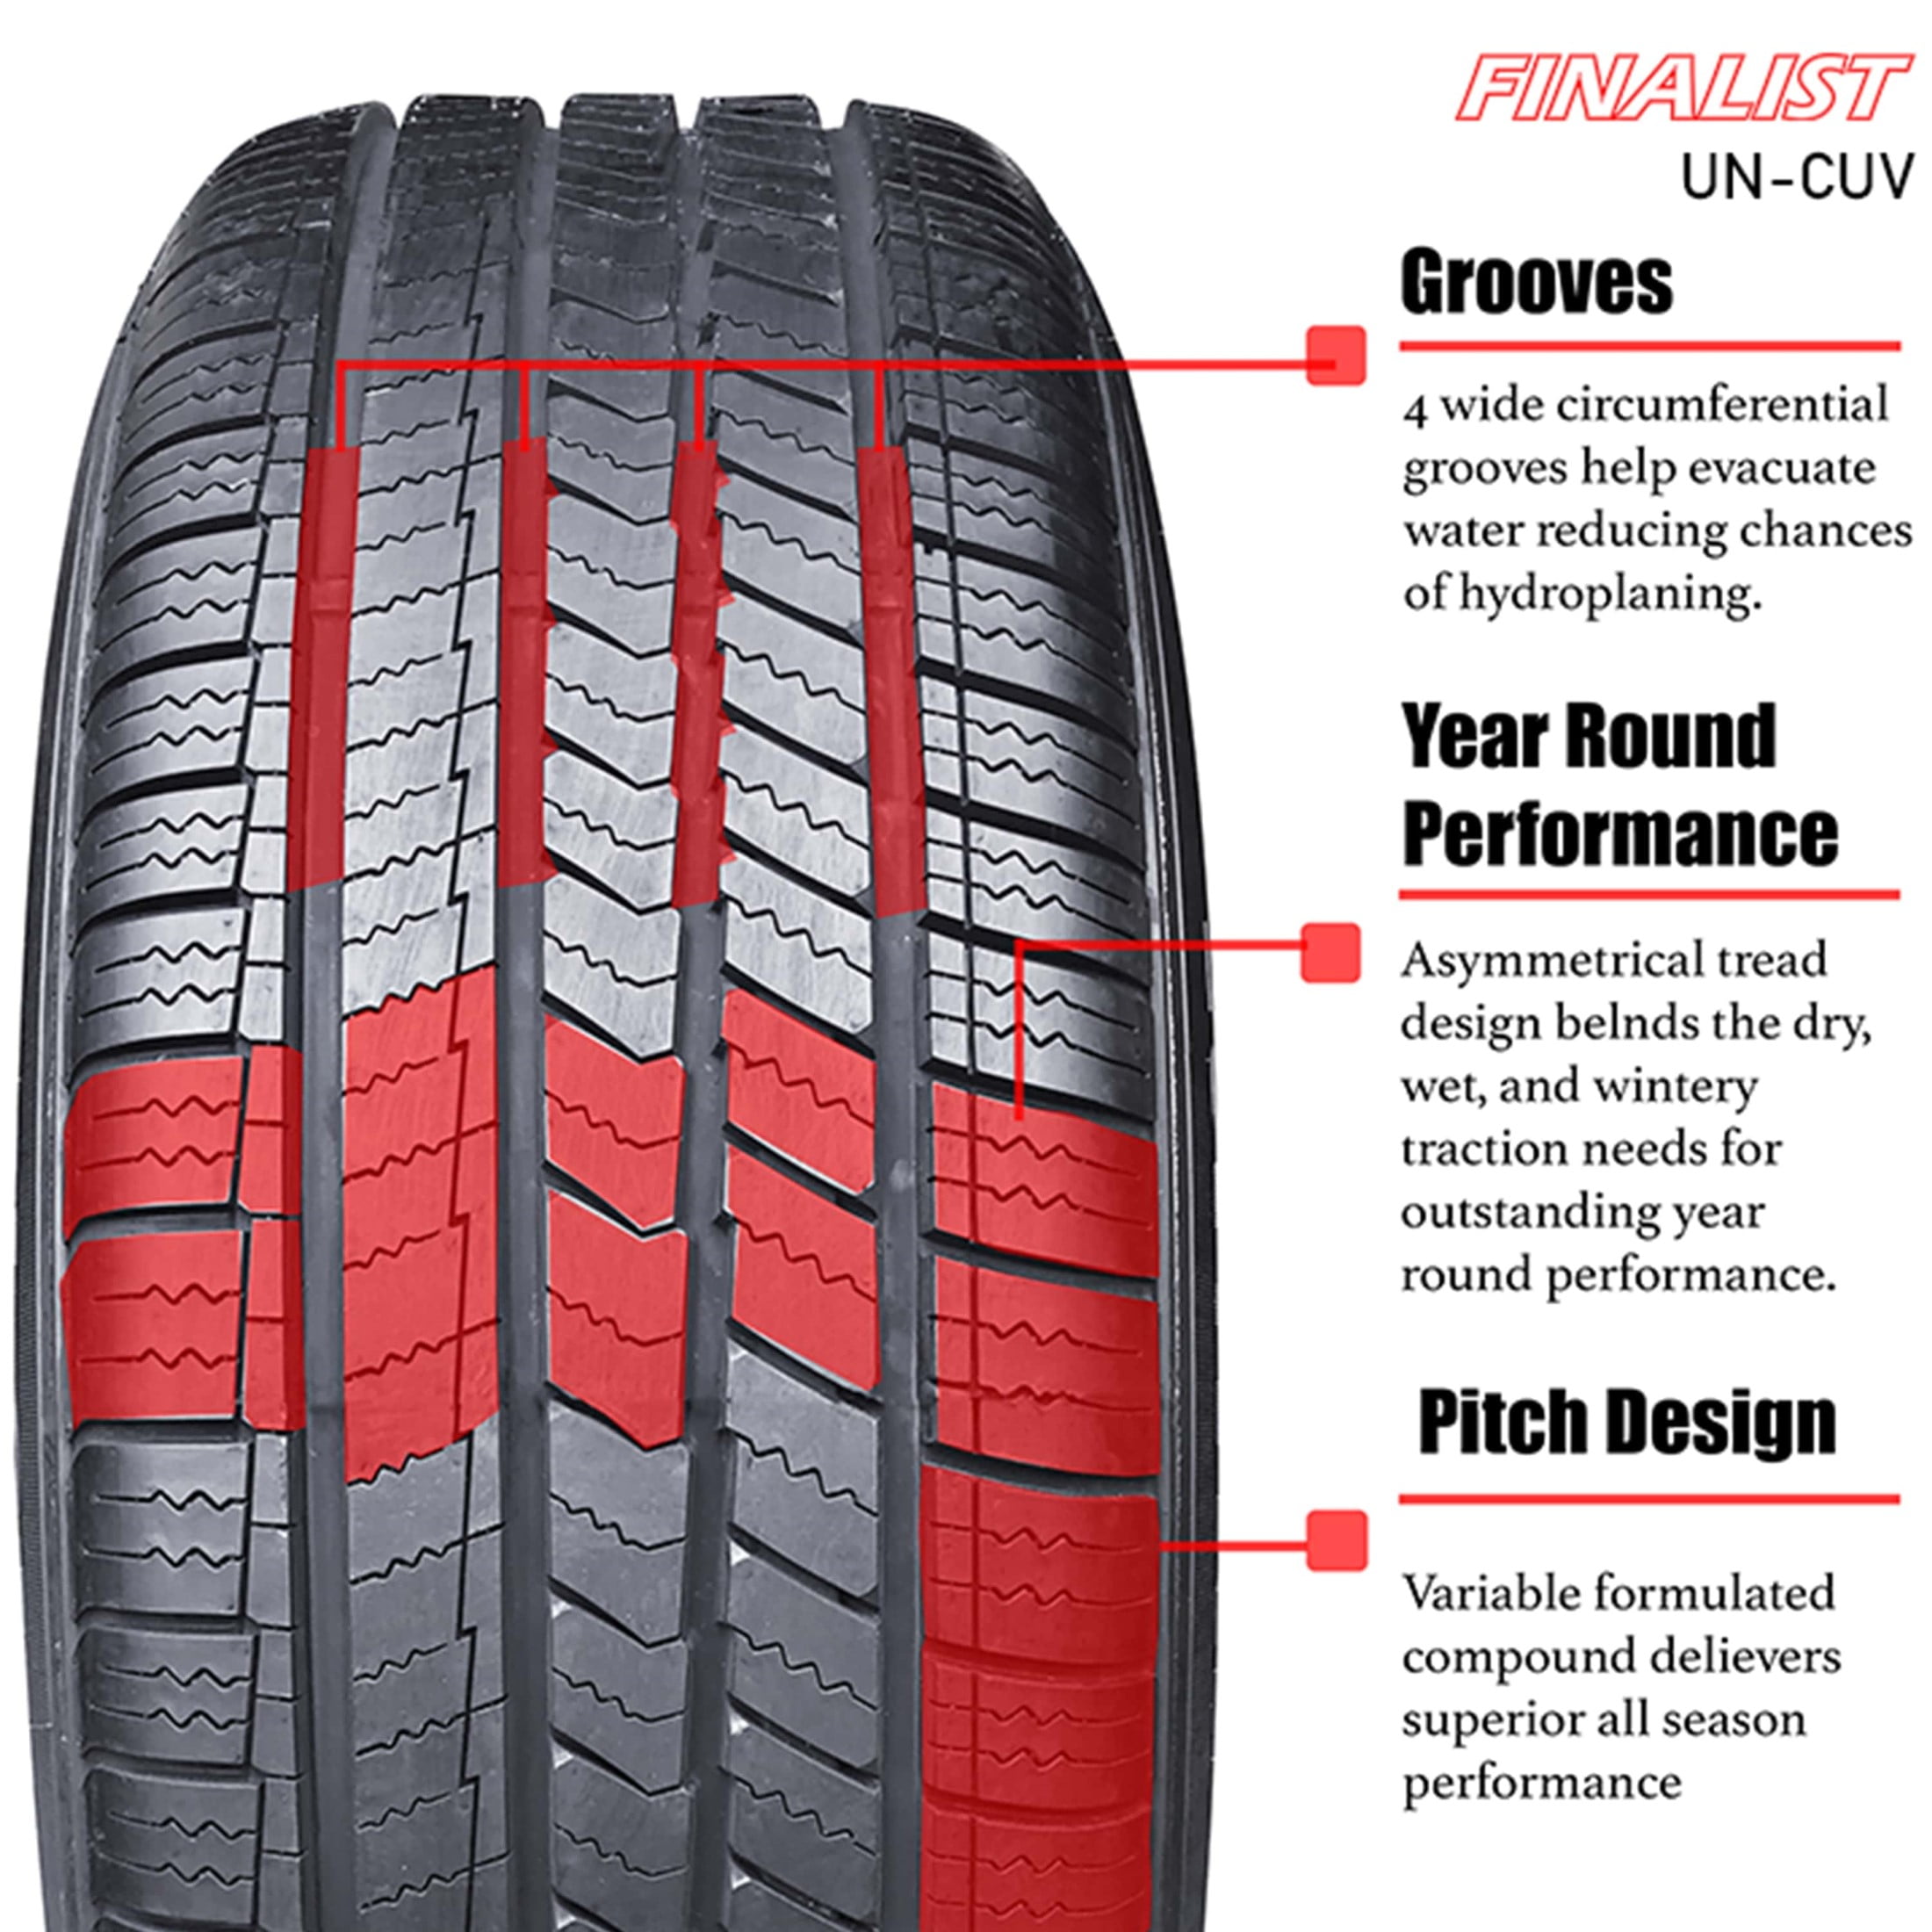 Season All High Finalist XL Performance Extra 235/65R17 SUV UN-CUV A/S Tire 235/65/17 108V (Tire Load CUV Only)